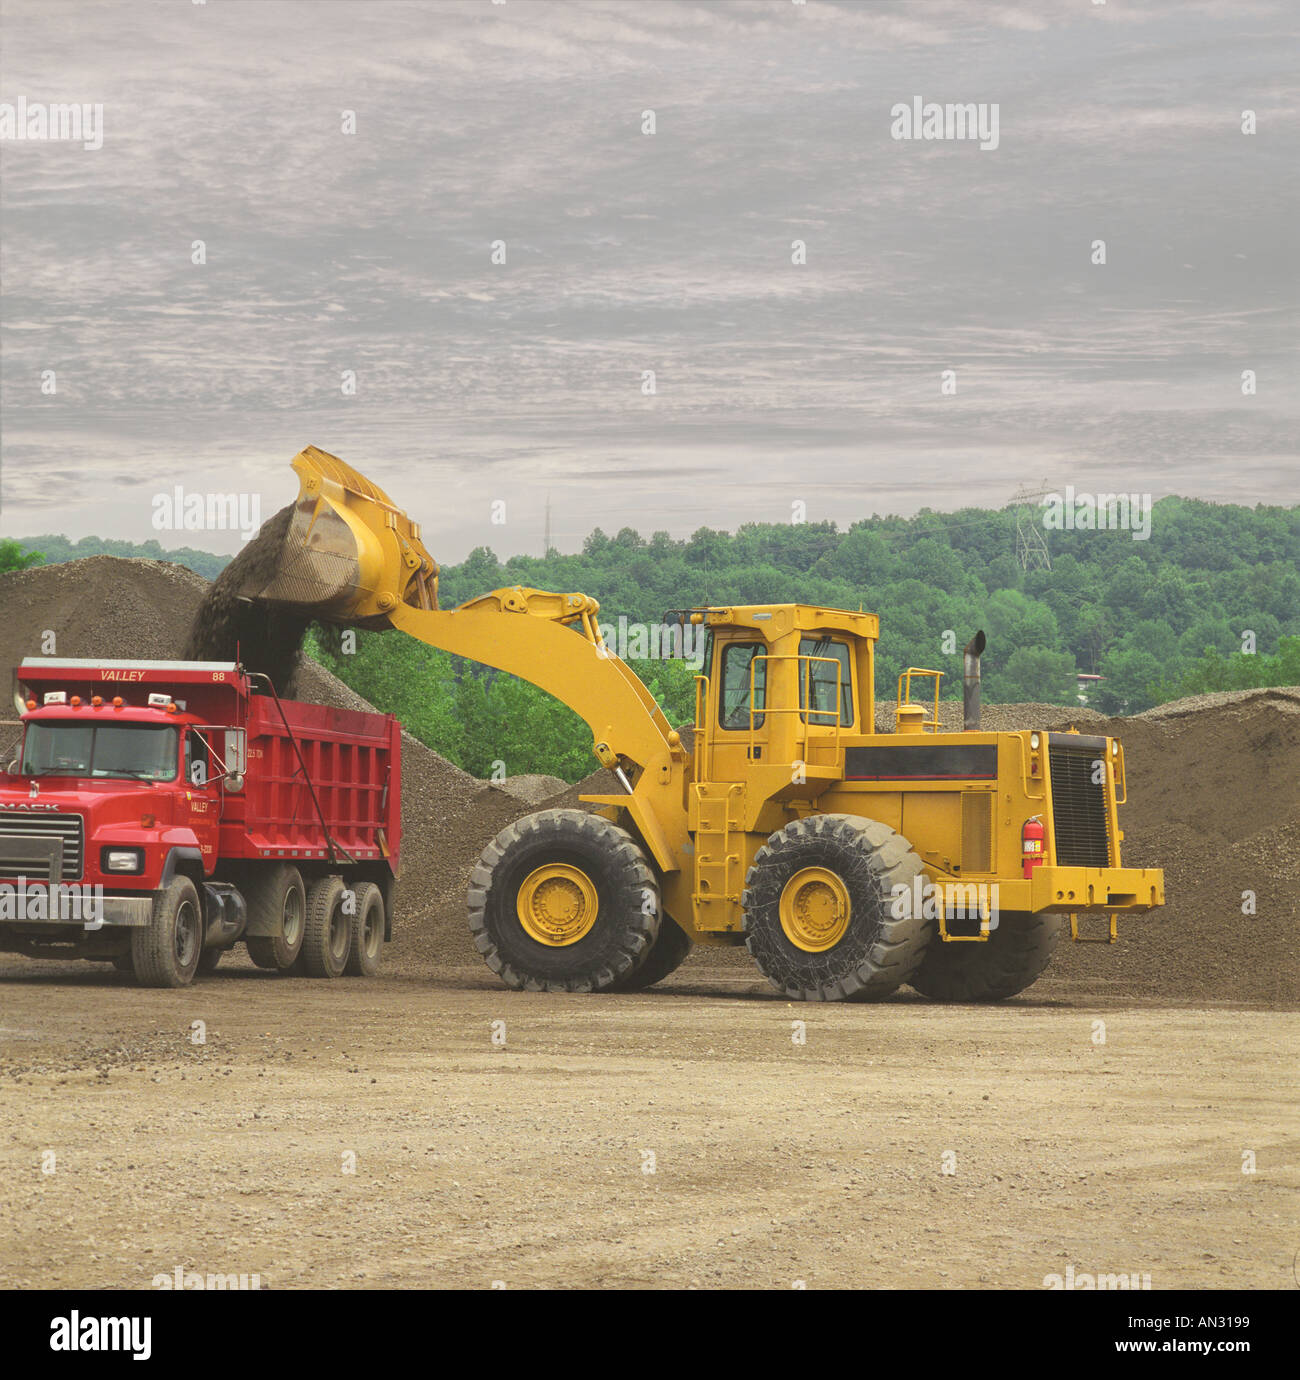 Front End Loader Earth Mover Construction Equipment Stock Photo